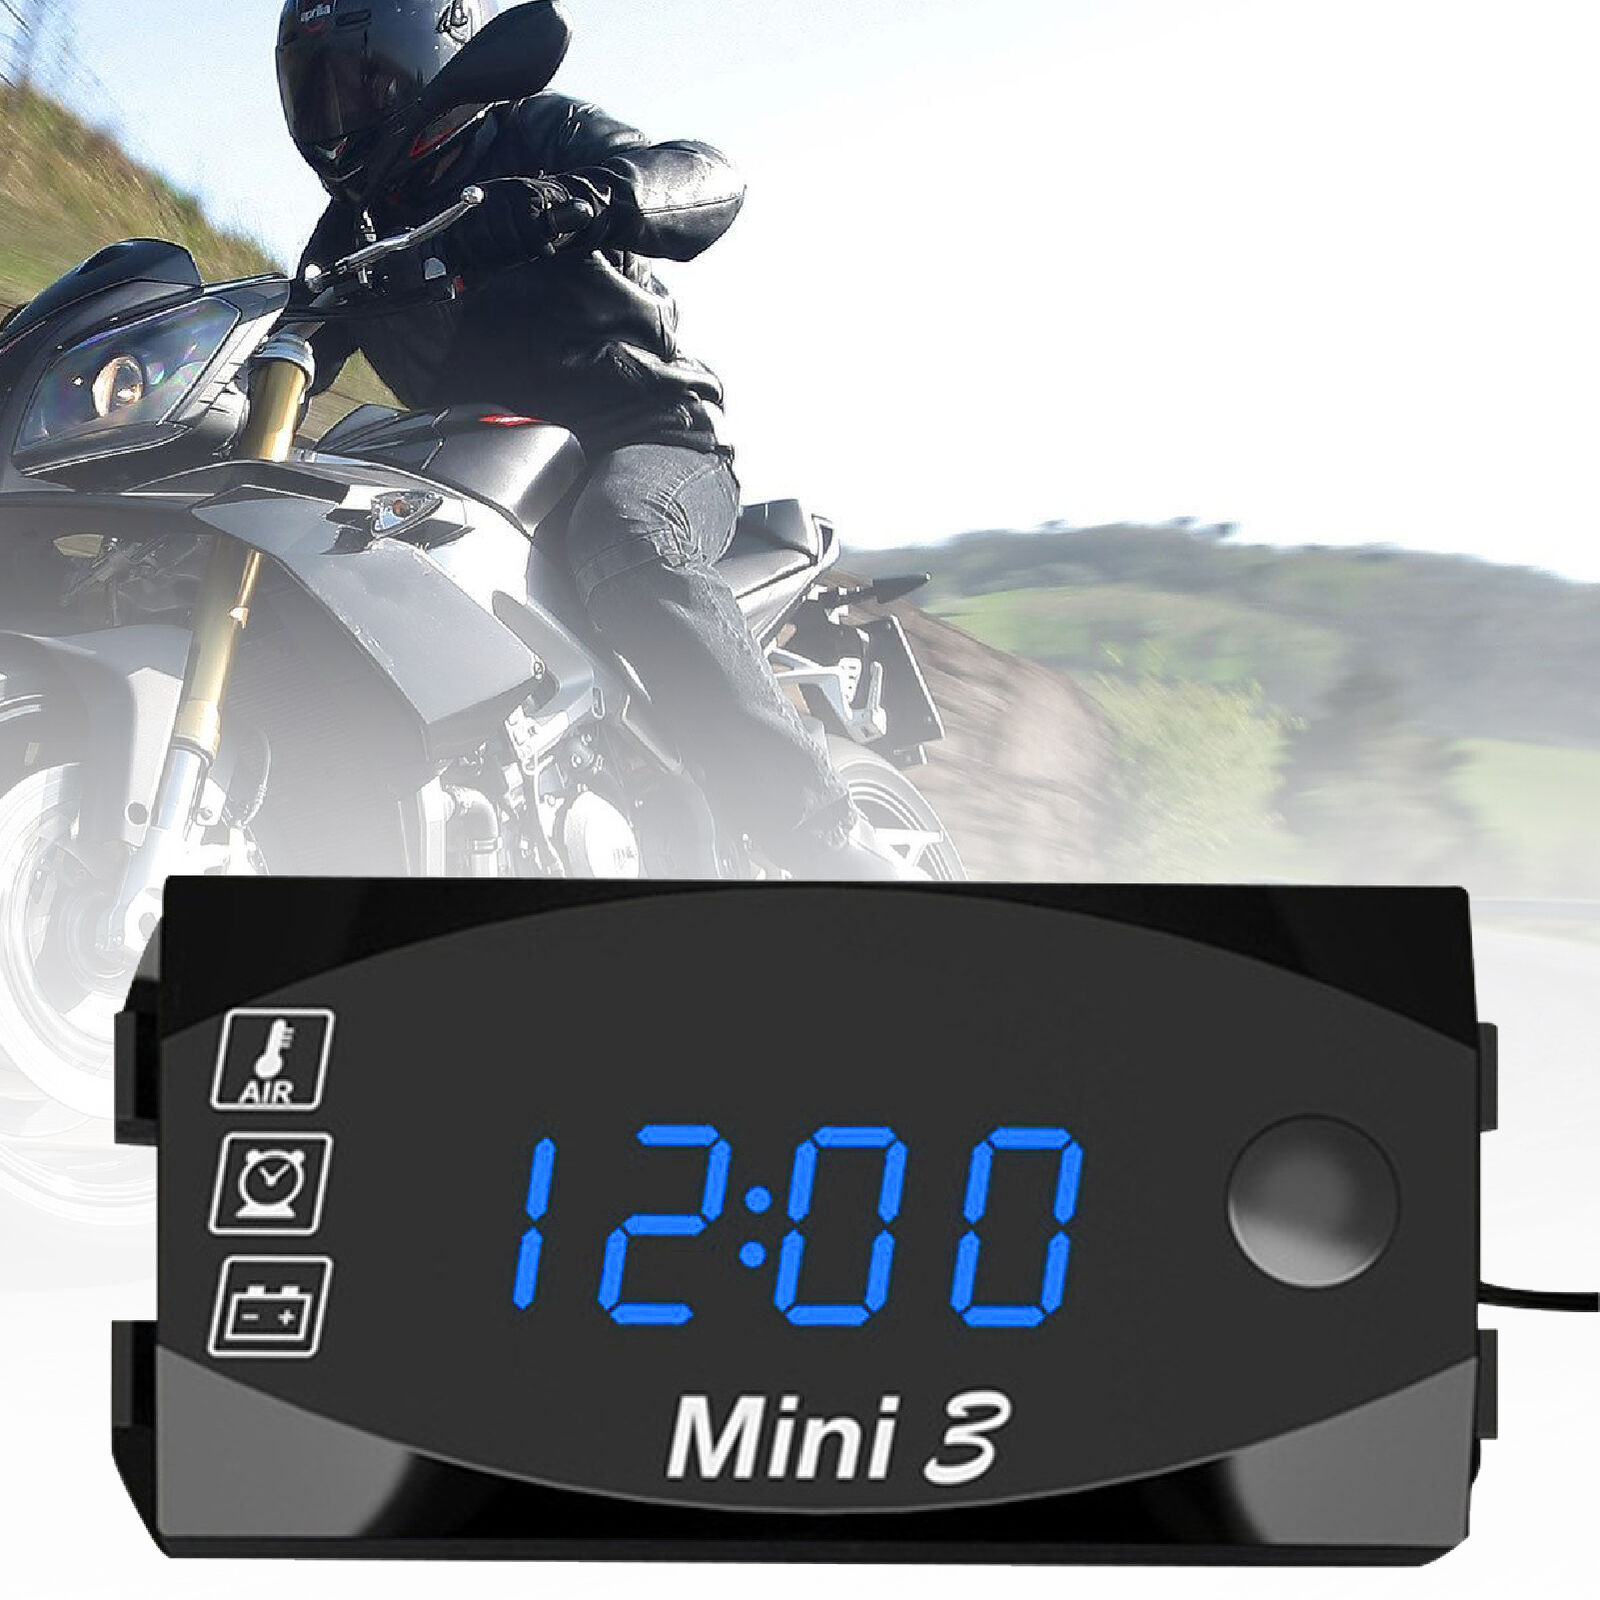 Practical Electronic Clock Thermometer Voltmeter IP67 3 in 1 12V for Motorcycle  Unbranded Does Not Apply - фотография #5